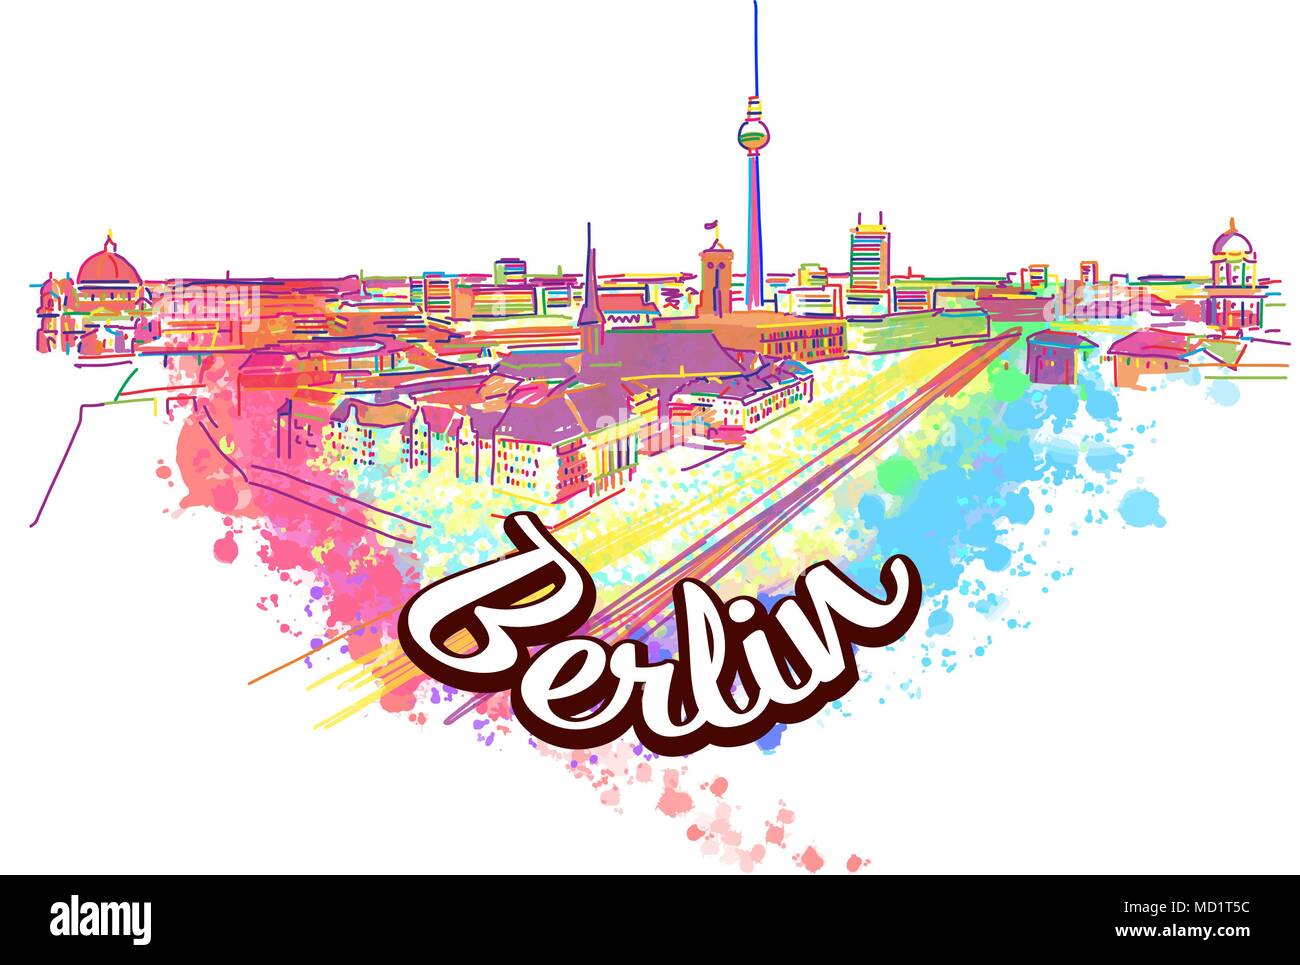 Berlin Skyline Drawing Art Concept. Hand drawn vector illustration. Travel the world concept image for digital marketing and poster prints. Stock Vector